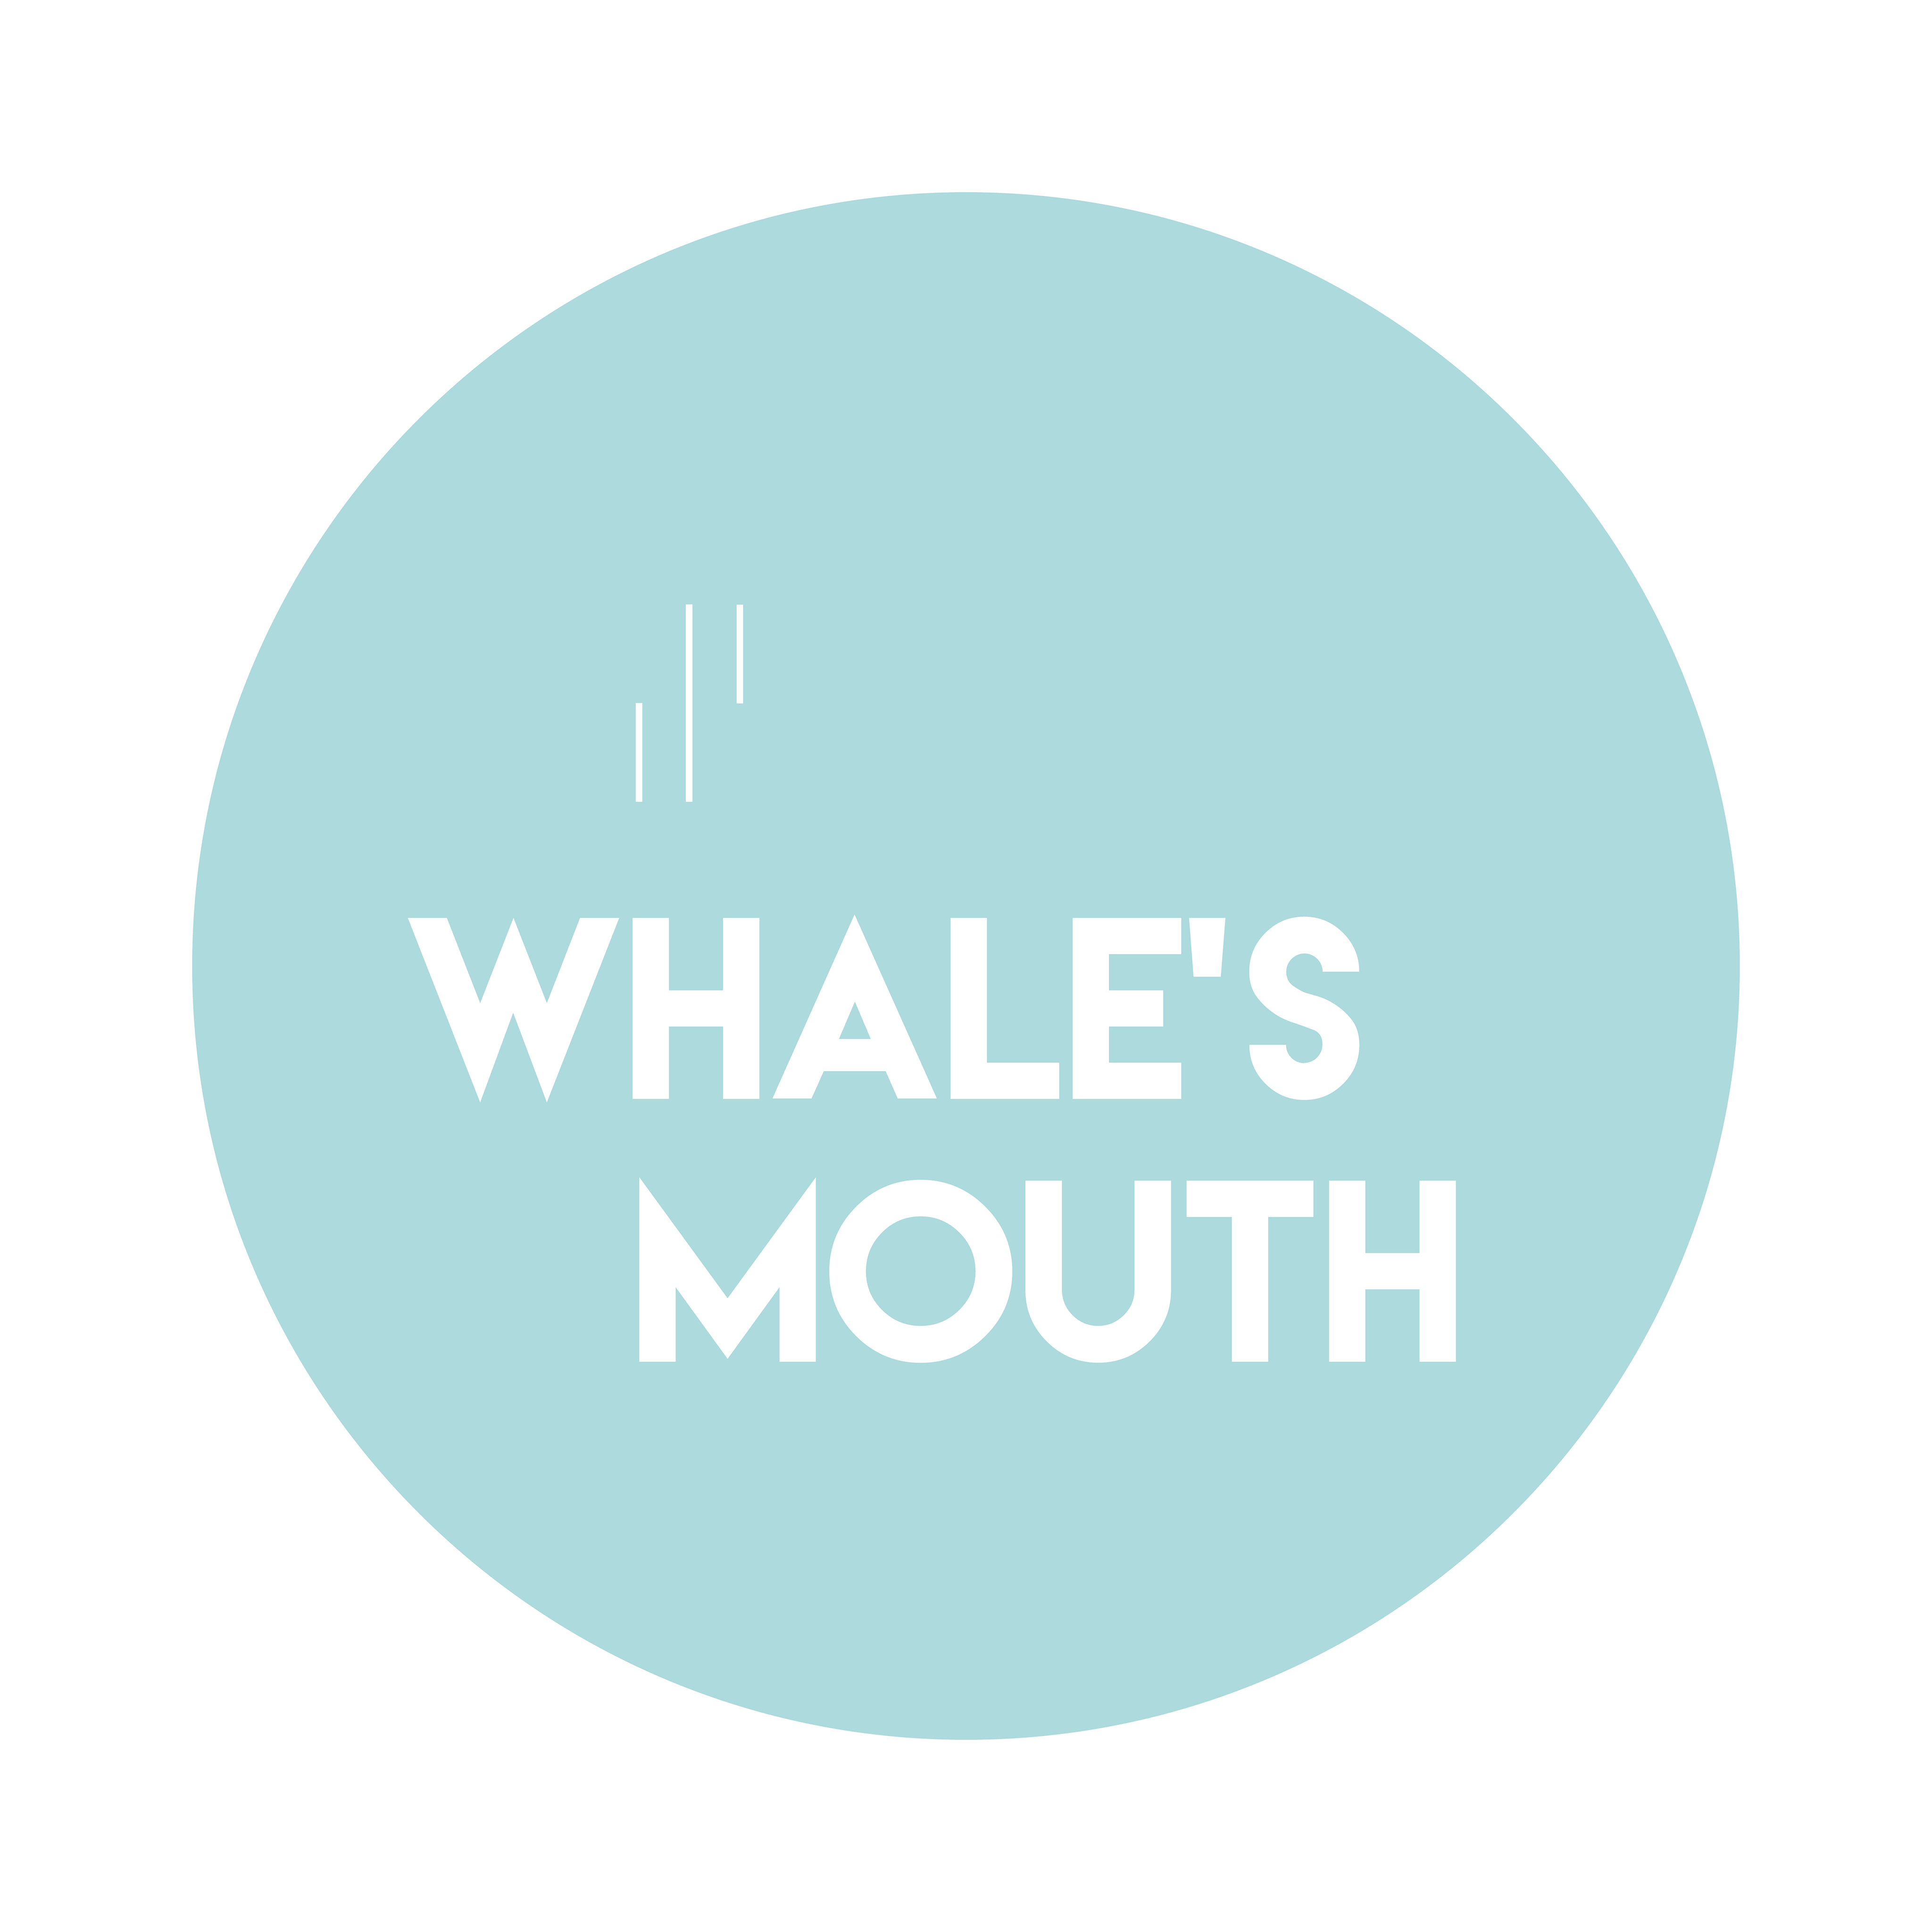 Whale's Mouth